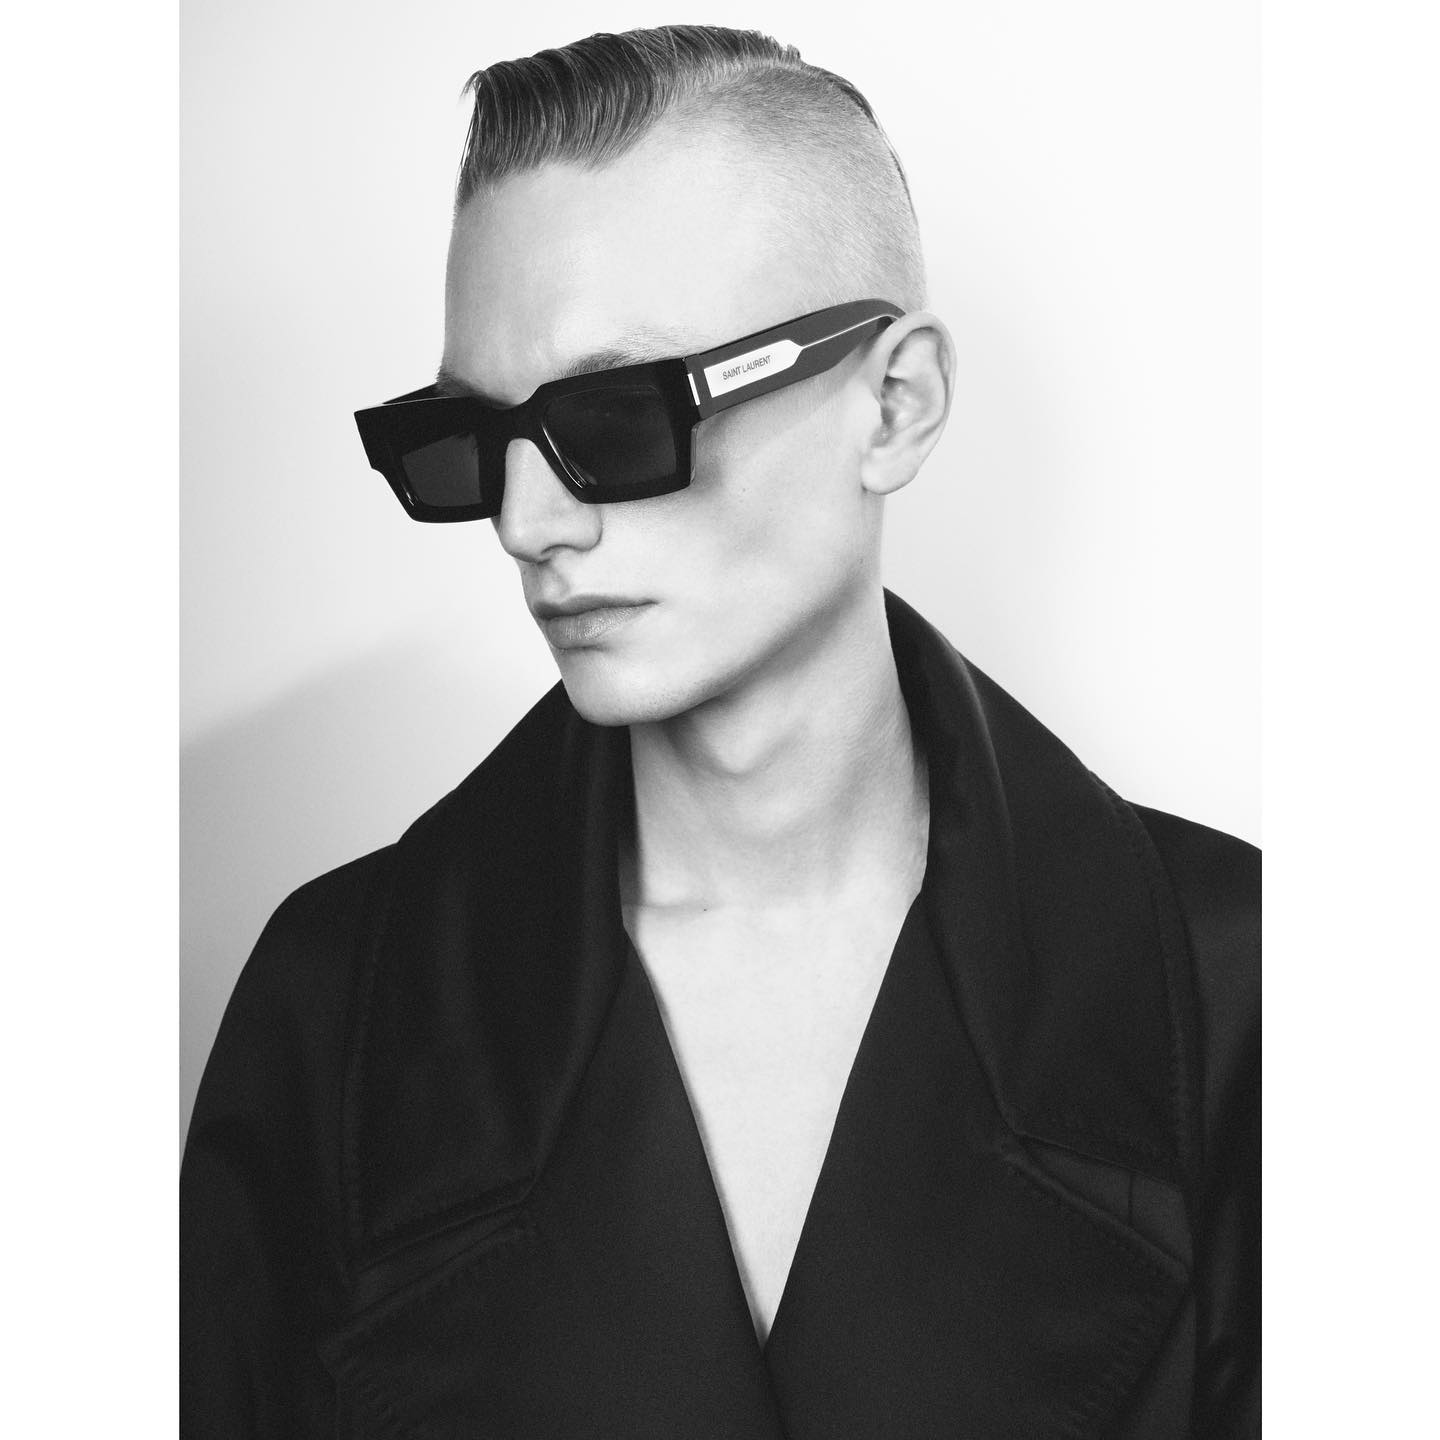 Jannis (@jannishanselmann ) for Saint Laurent Eyewear Campaign. Photography by David Sims, styling by Paul Sinclaire, hair by Duffy, make-up by Lucia Pieroni, casting by Samuel Ellis for DM Casting.